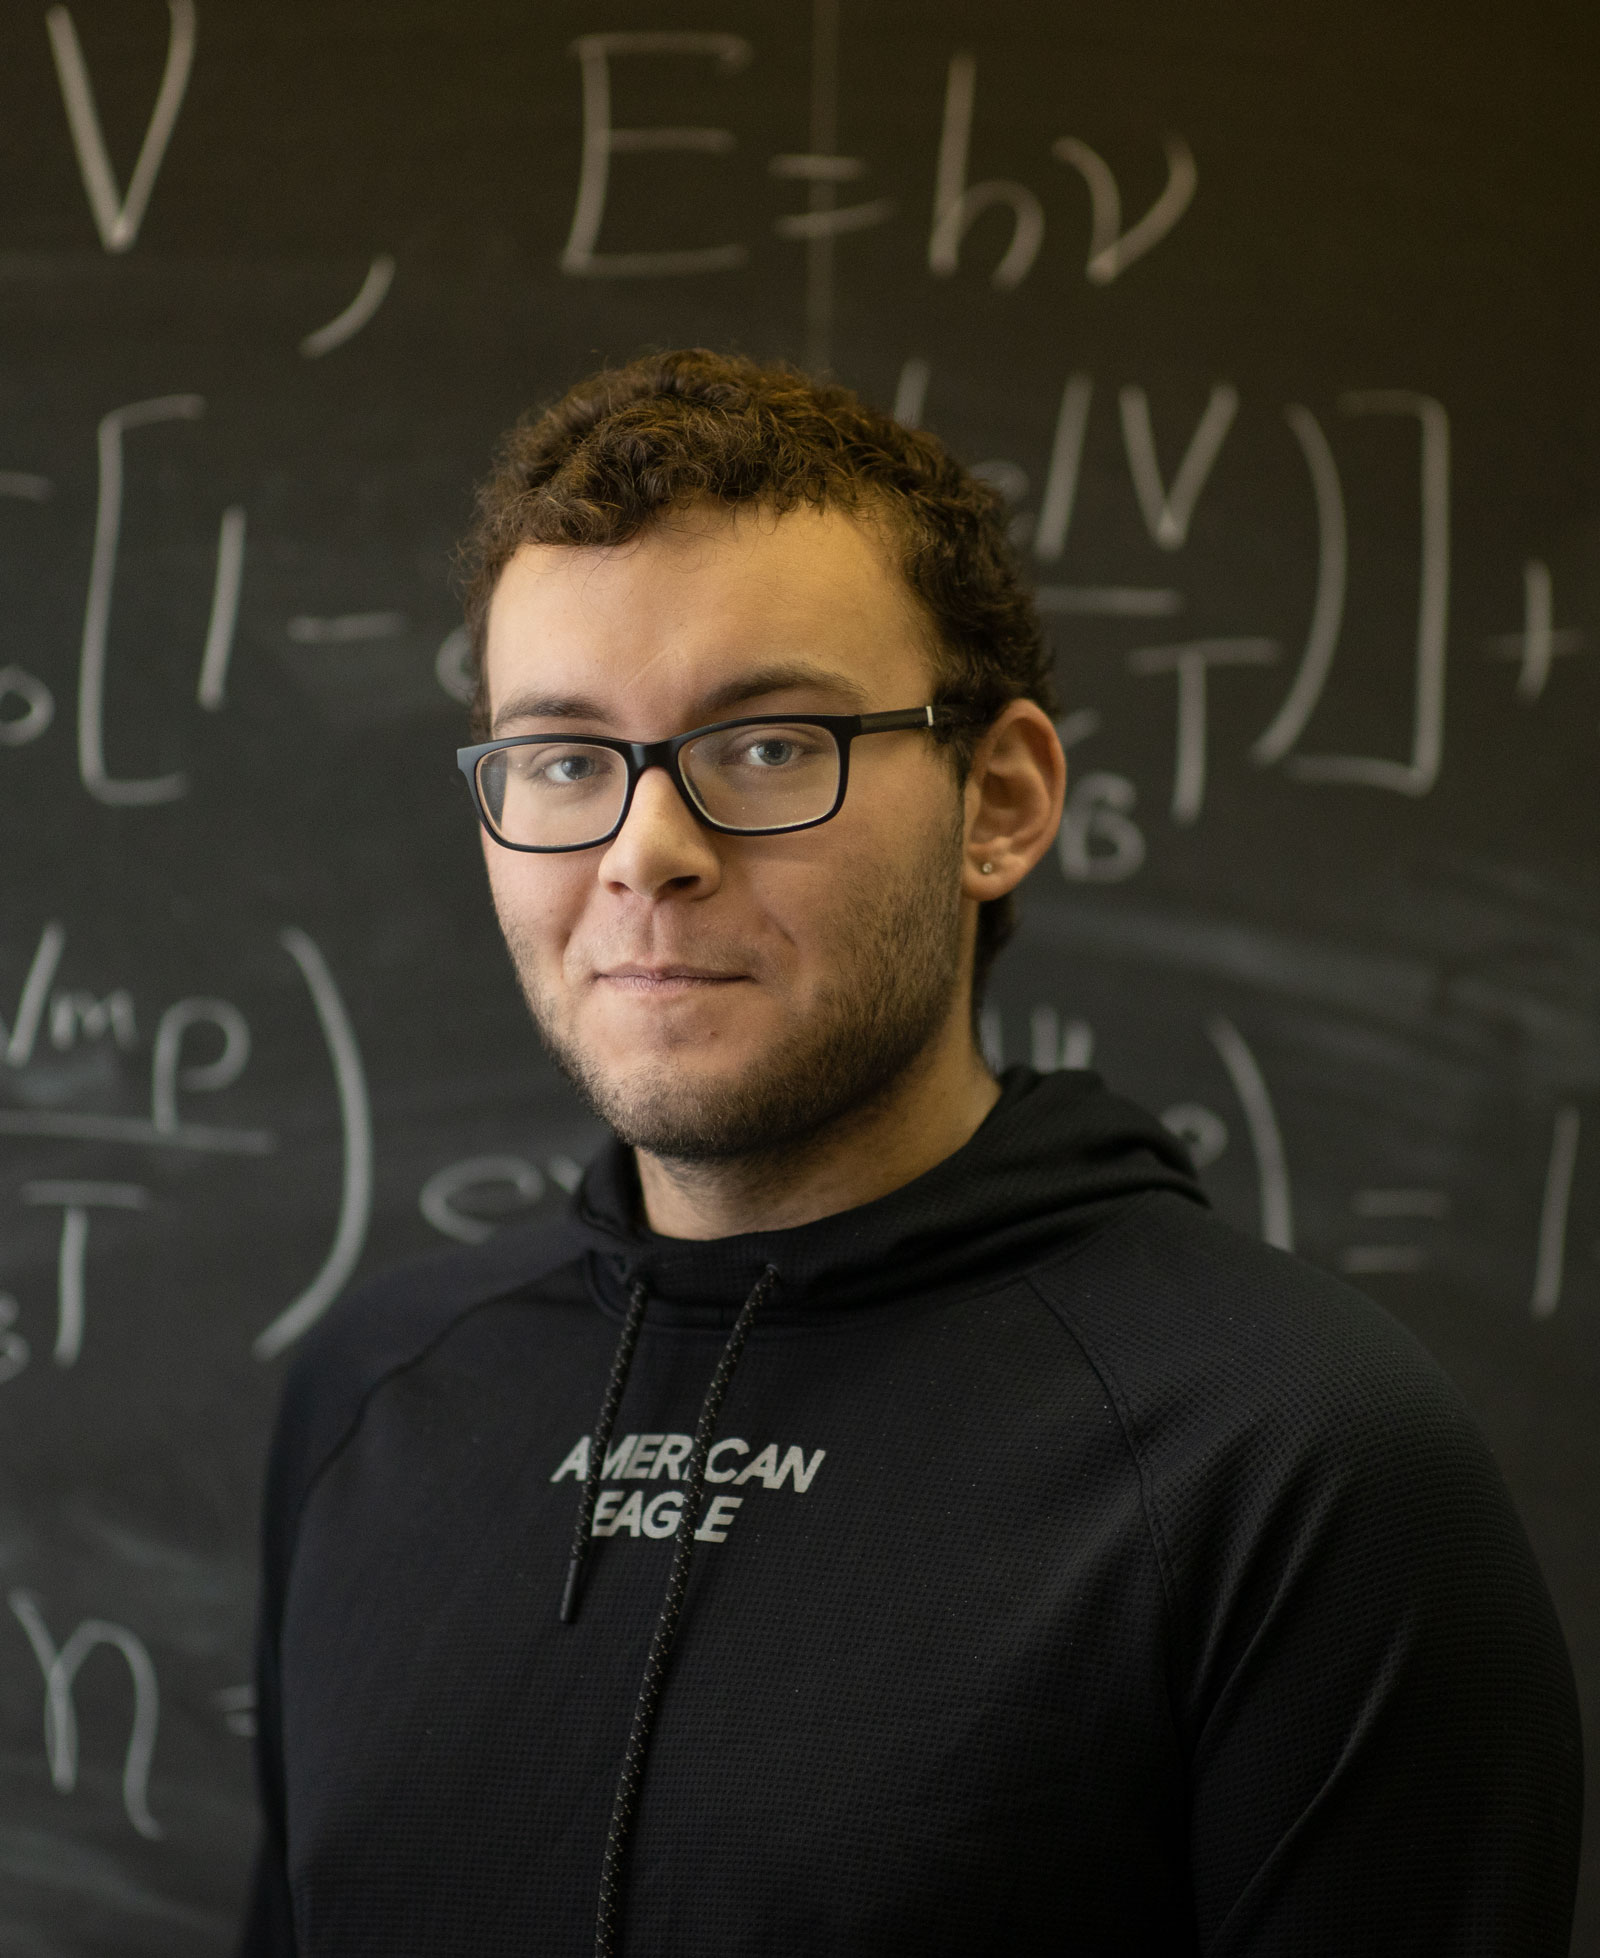 math student pictured in front of equations on a chalkboard.